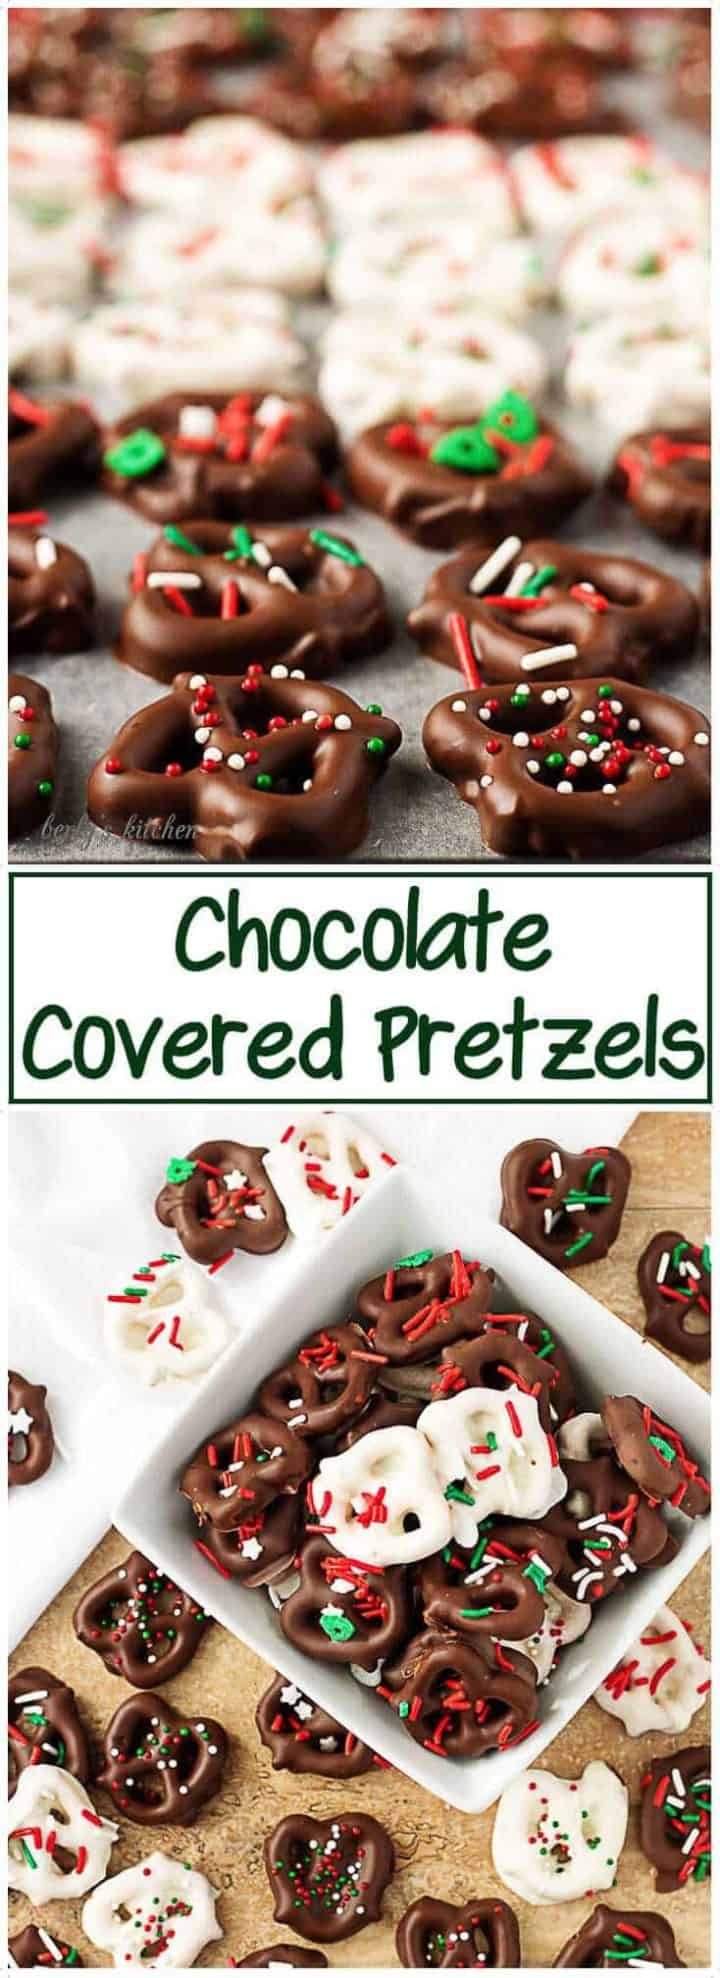 Stacked pictures of the chocolate covered pretzels recipe showing the finished pretzels dipped in chocolate and topped with sprinkles.